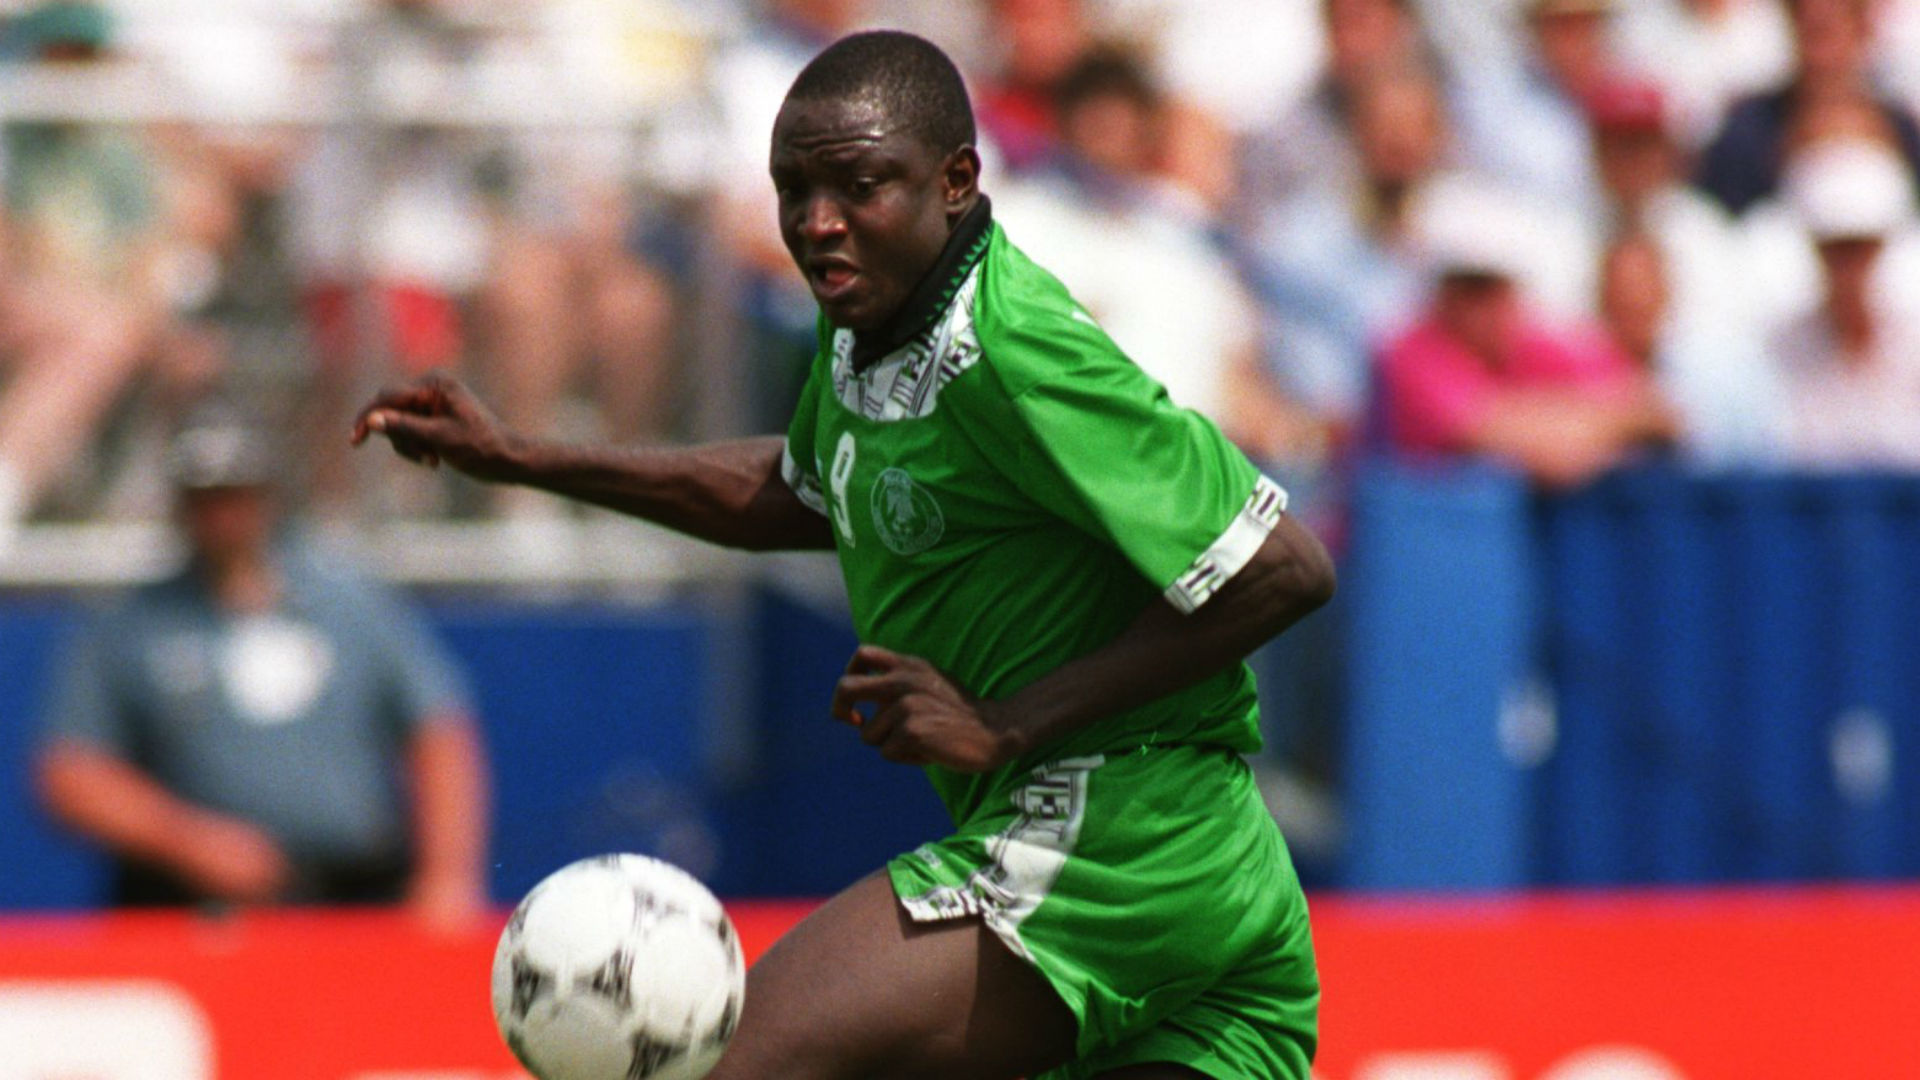 NFF places mothers of Yekini, Okwaraji on N30,000 monthly stipend